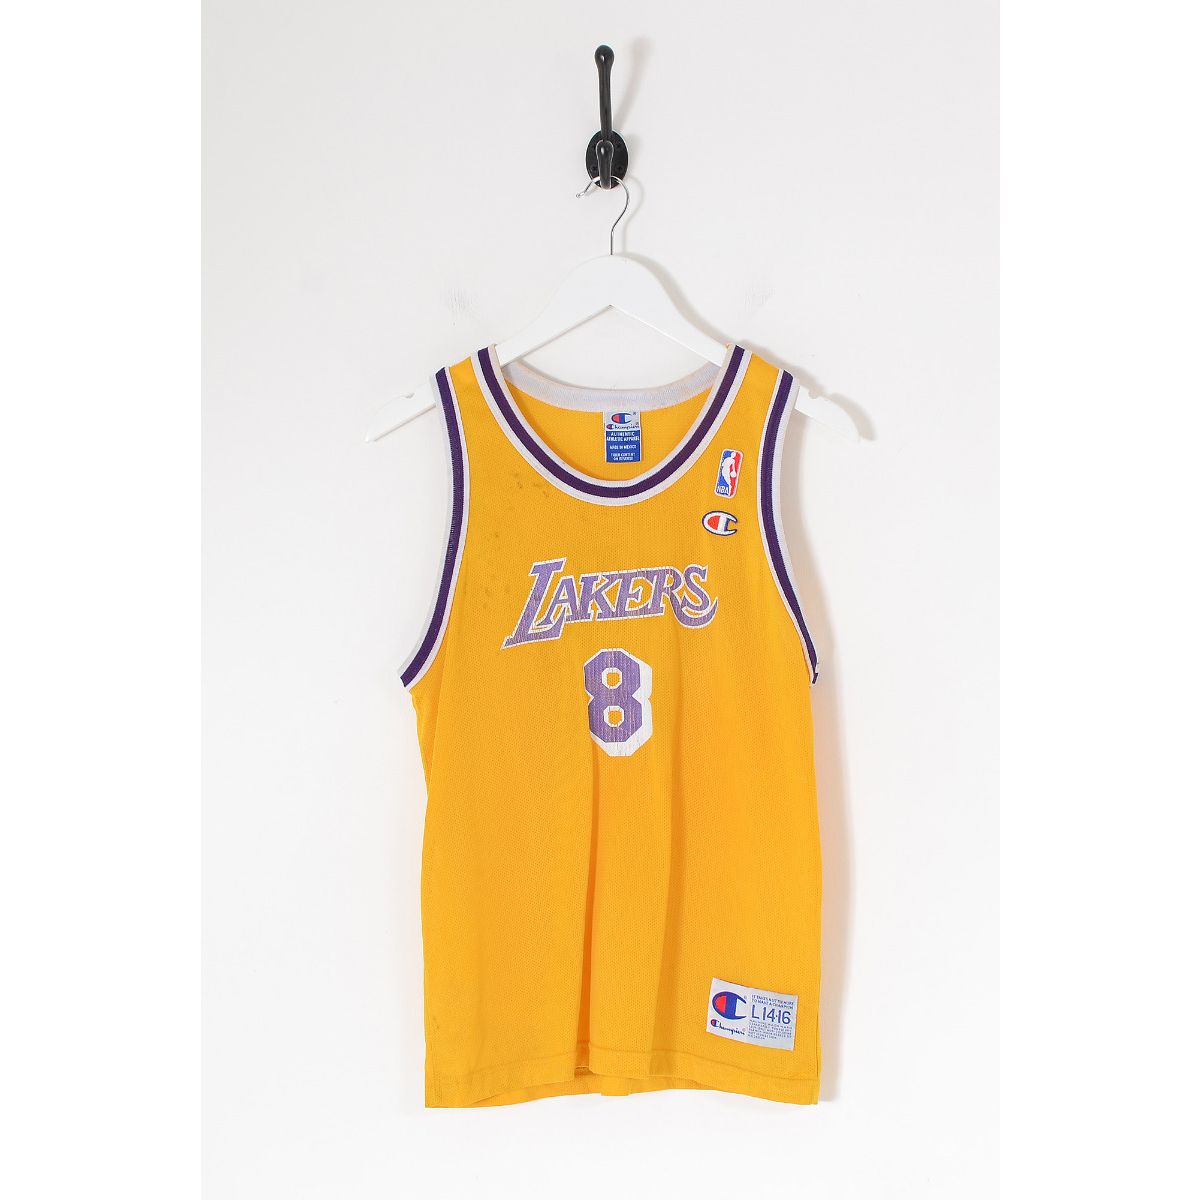 Vintage CHAMPION NBA Los Angeles Lakers Basketball Jersey Yellow Large, Vintage Online